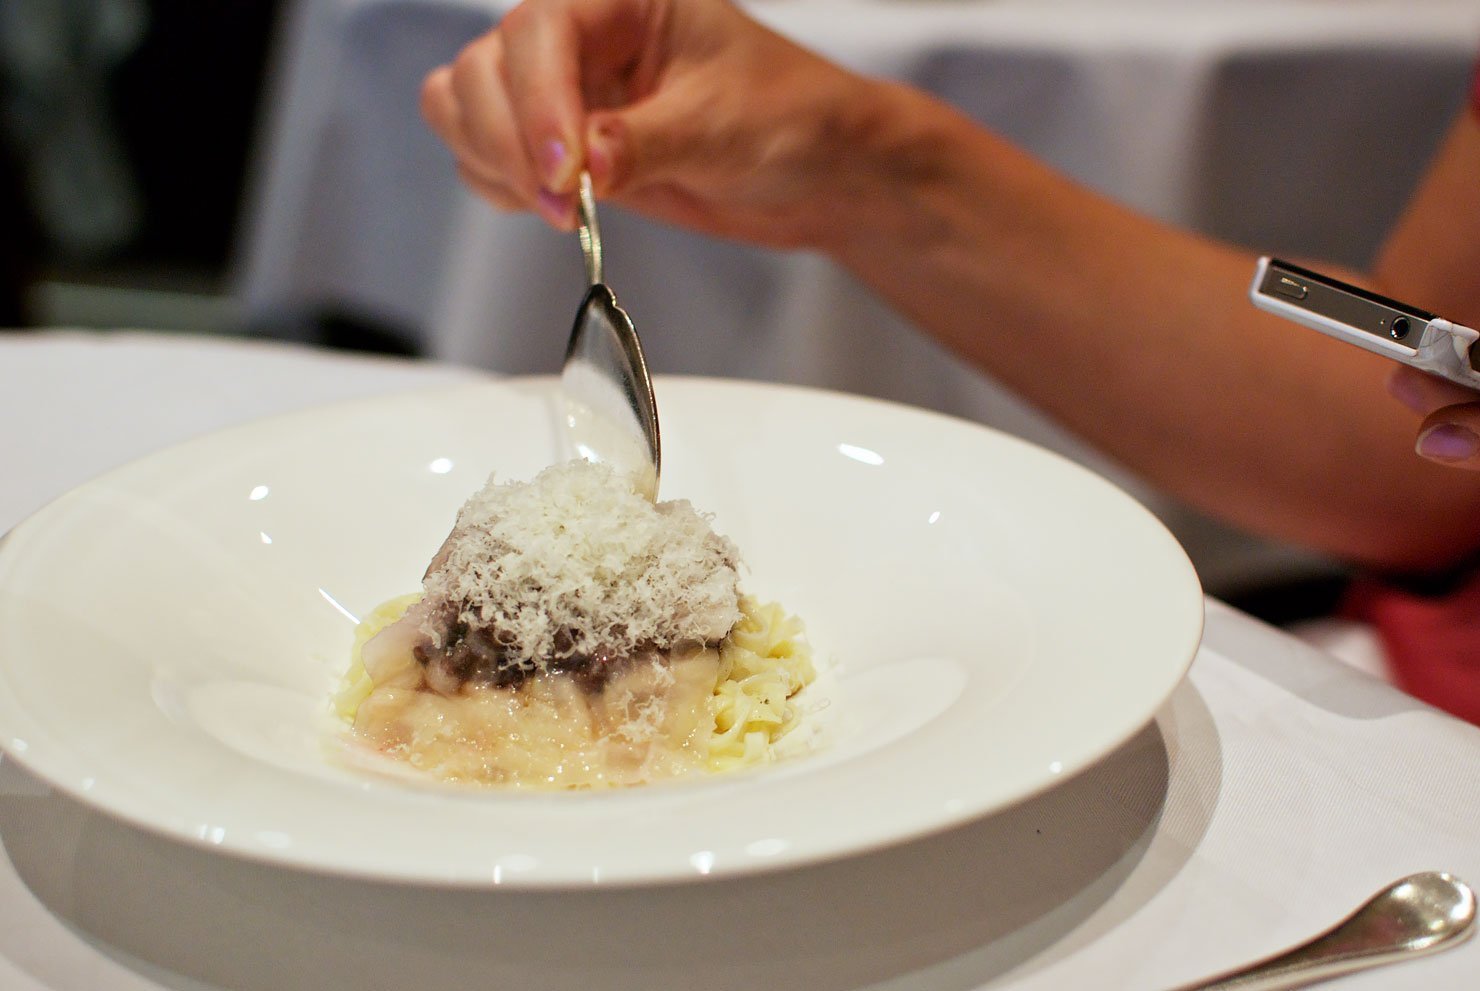 Review of a TRULY luxurious gift experience at The Square Restaurant in London. Starter: Hare bolognese with hand rolled linguine.